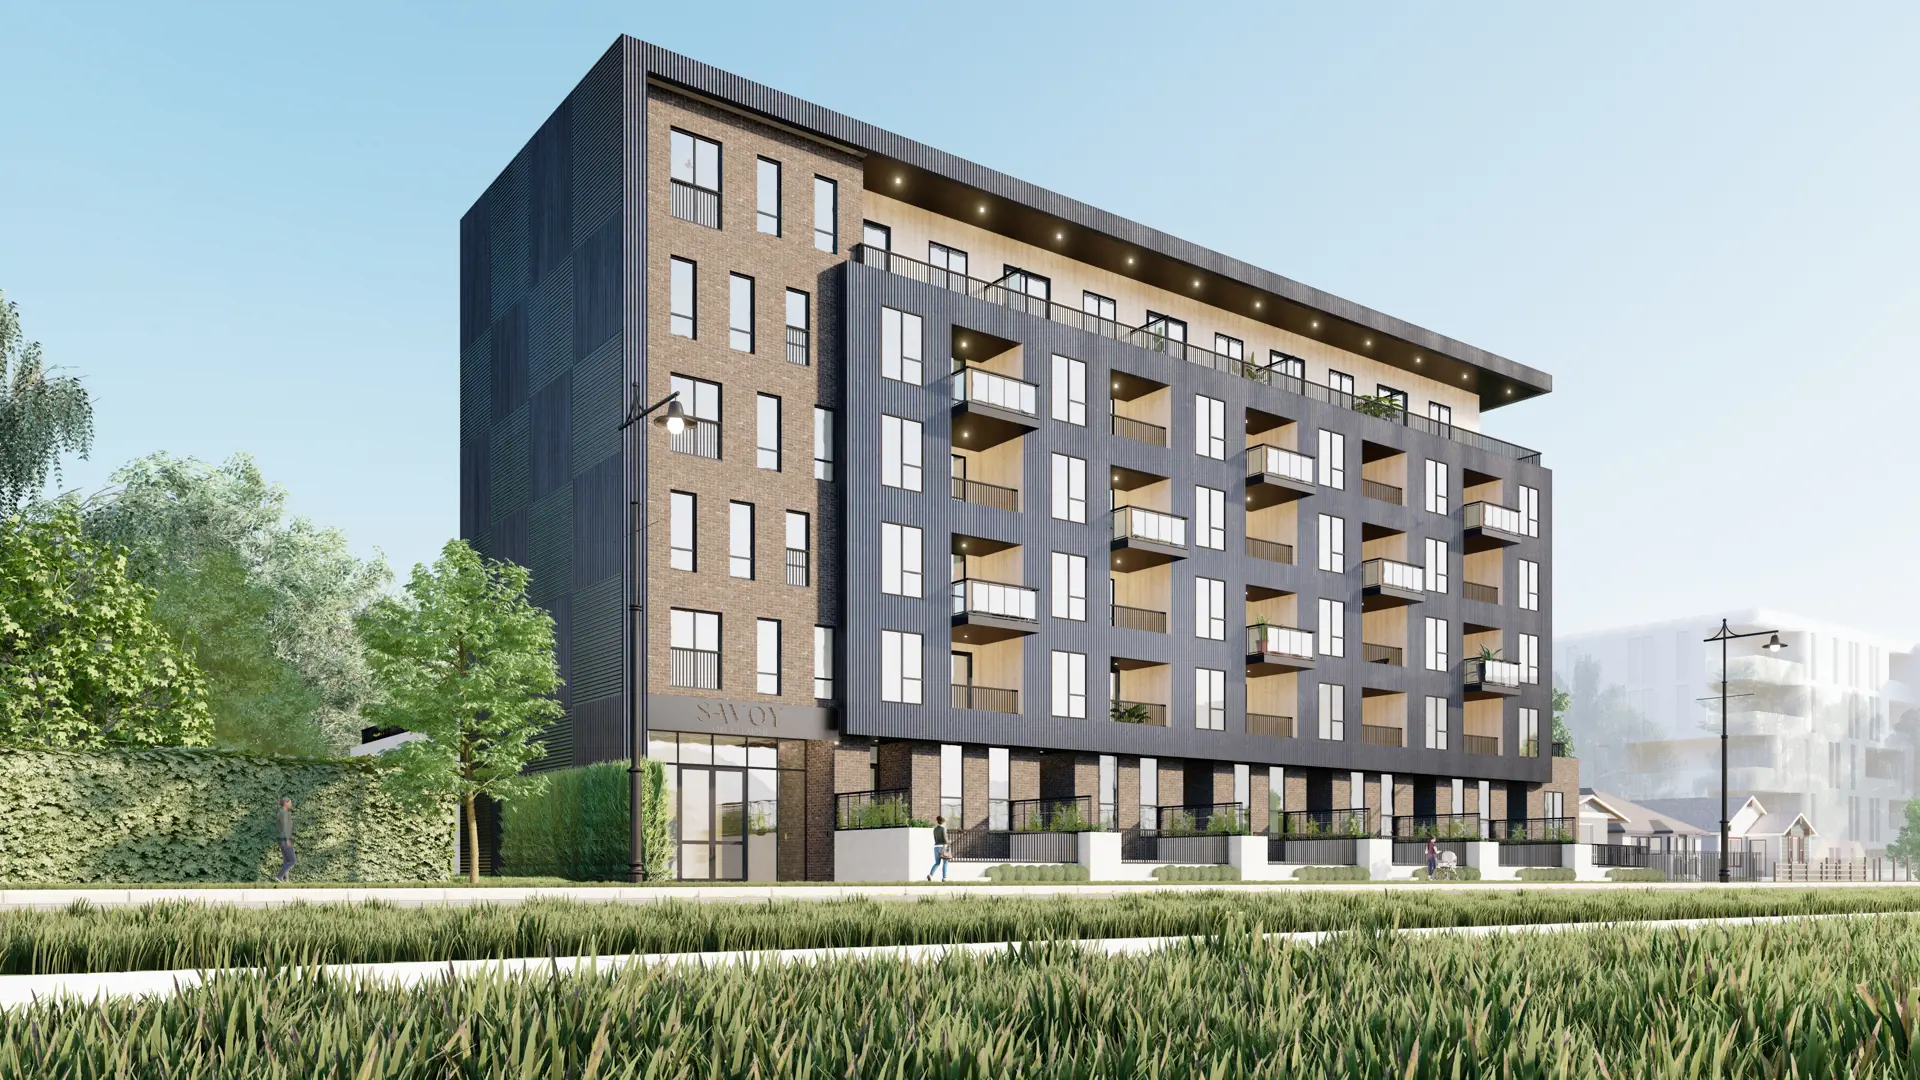 Savoy on Clement Condos located at 647 Clement Avenue,  Kelowna,   BC image